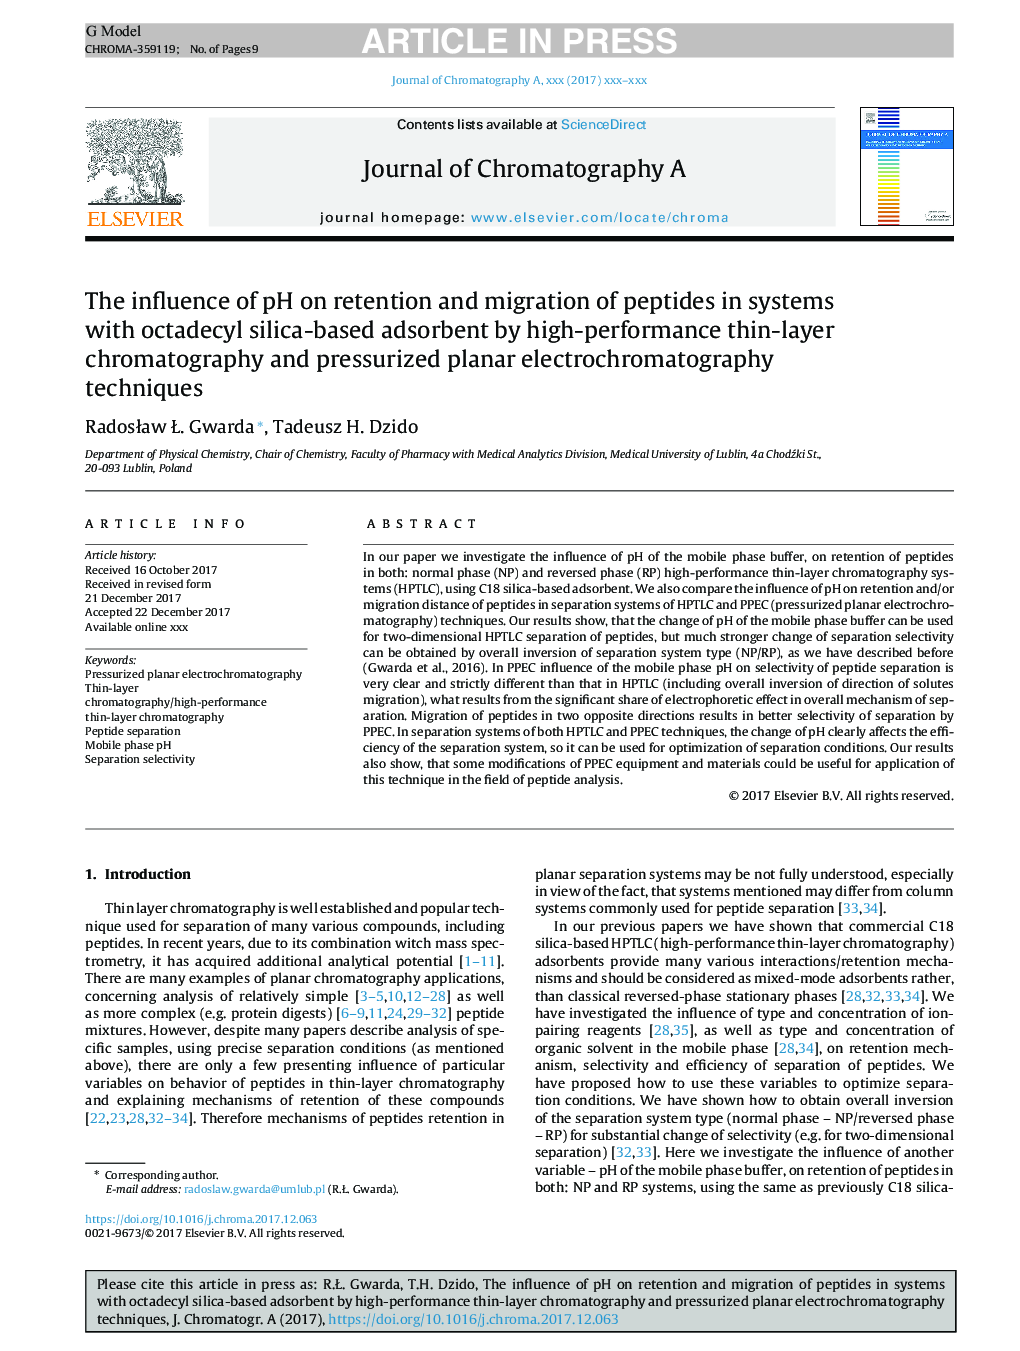 The influence of pH on retention and migration of peptides in systems with octadecyl silica-based adsorbent by high-performance thin-layer chromatography and pressurized planar electrochromatography techniques